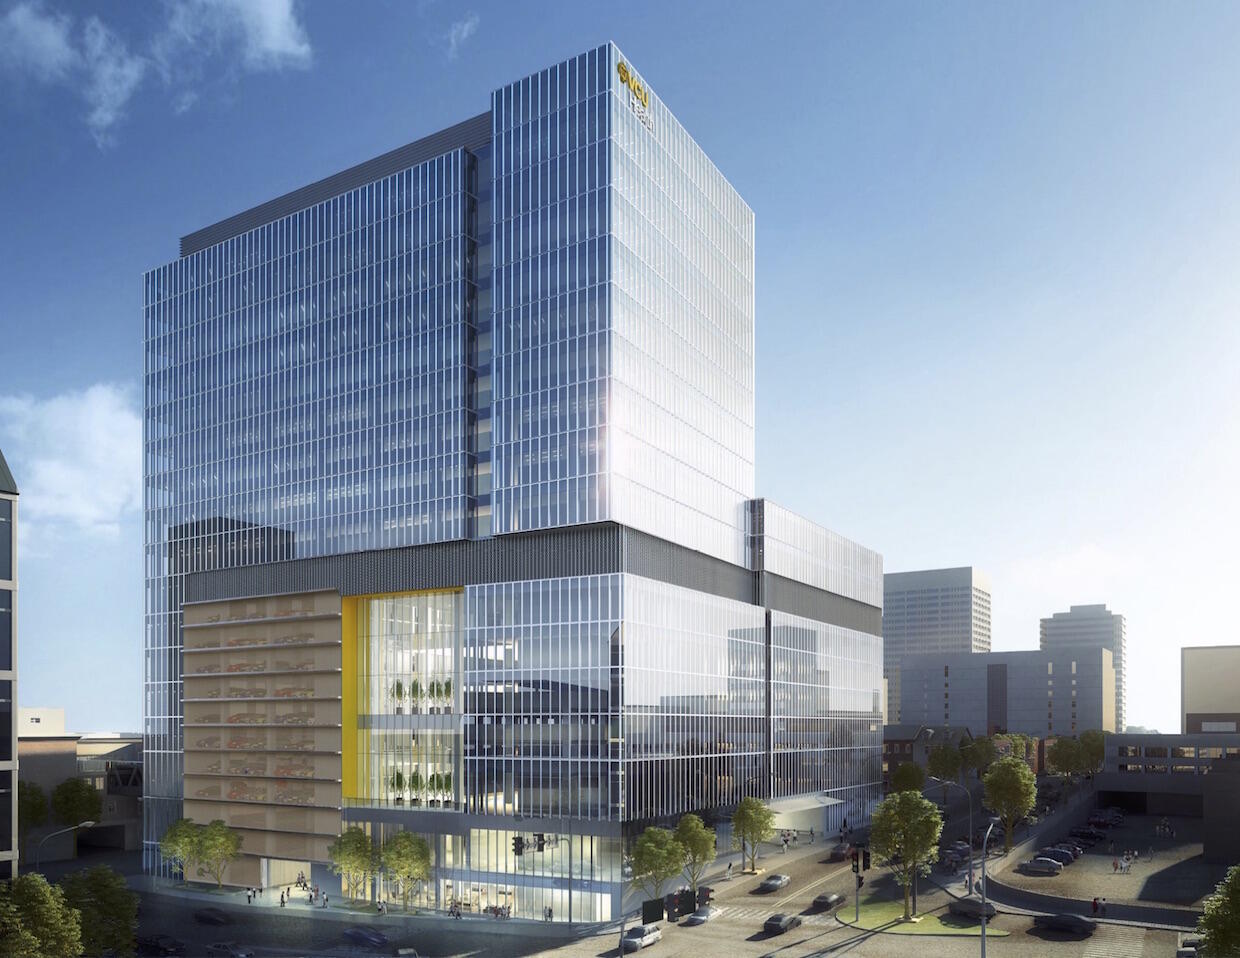 VCU Massey Cancer Center will consolidate most outpatient services in the new building, including clinics, oncology infusion and radiation oncology care. 